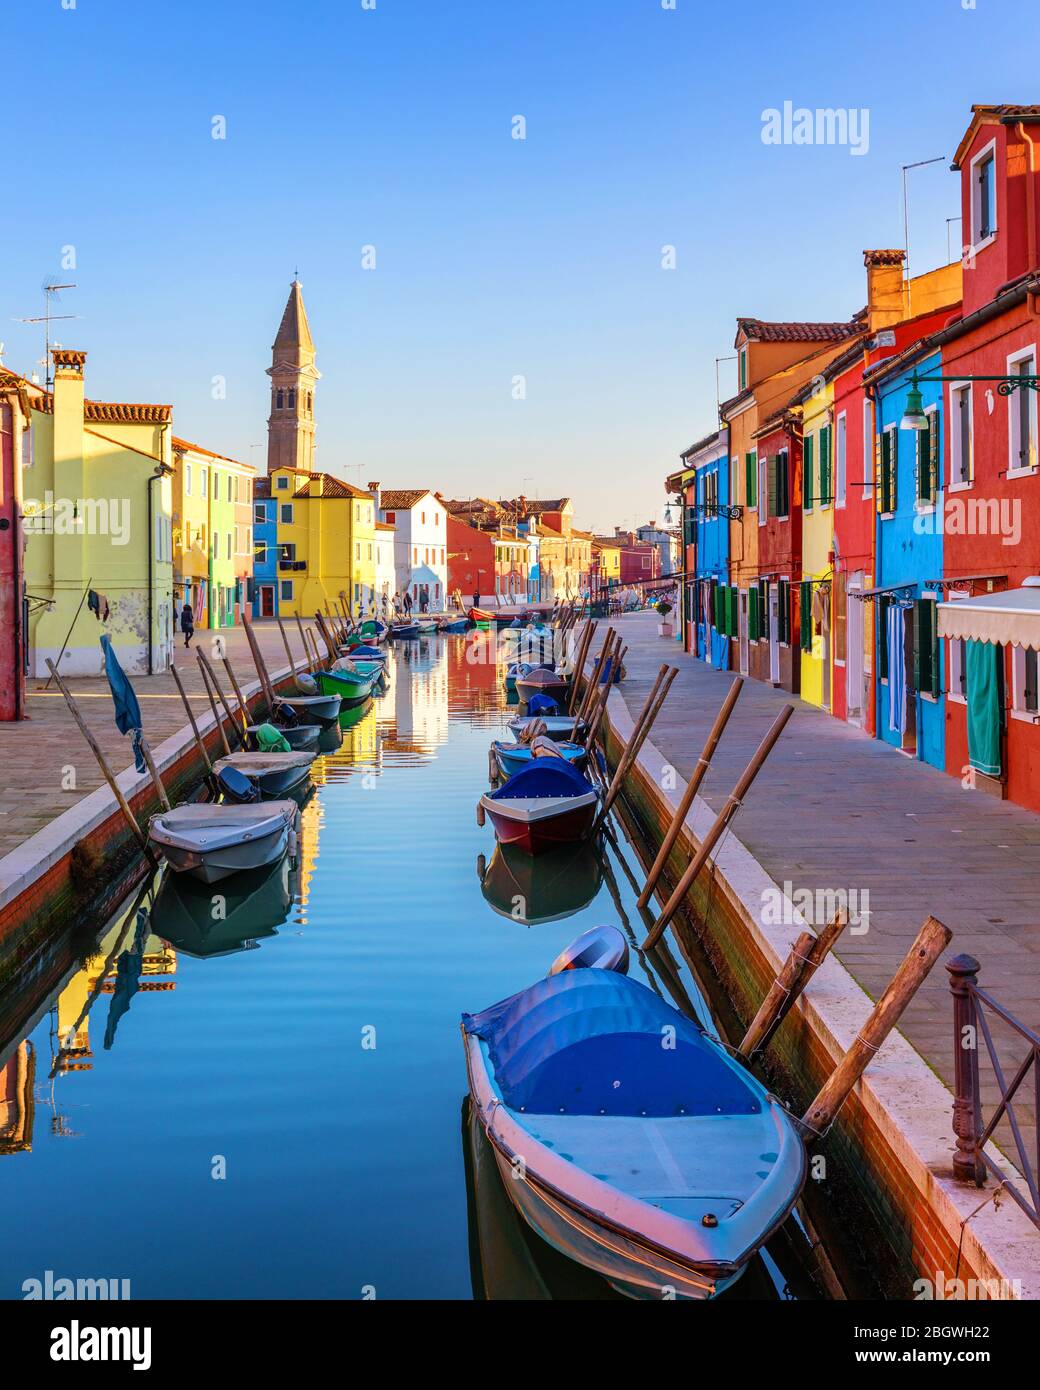 Street with colorful buildings in Burano island, Venice, Italy. Architecture and landmarks of Burano, Venice postcard. Scenic canal and colorful archi Stock Photo